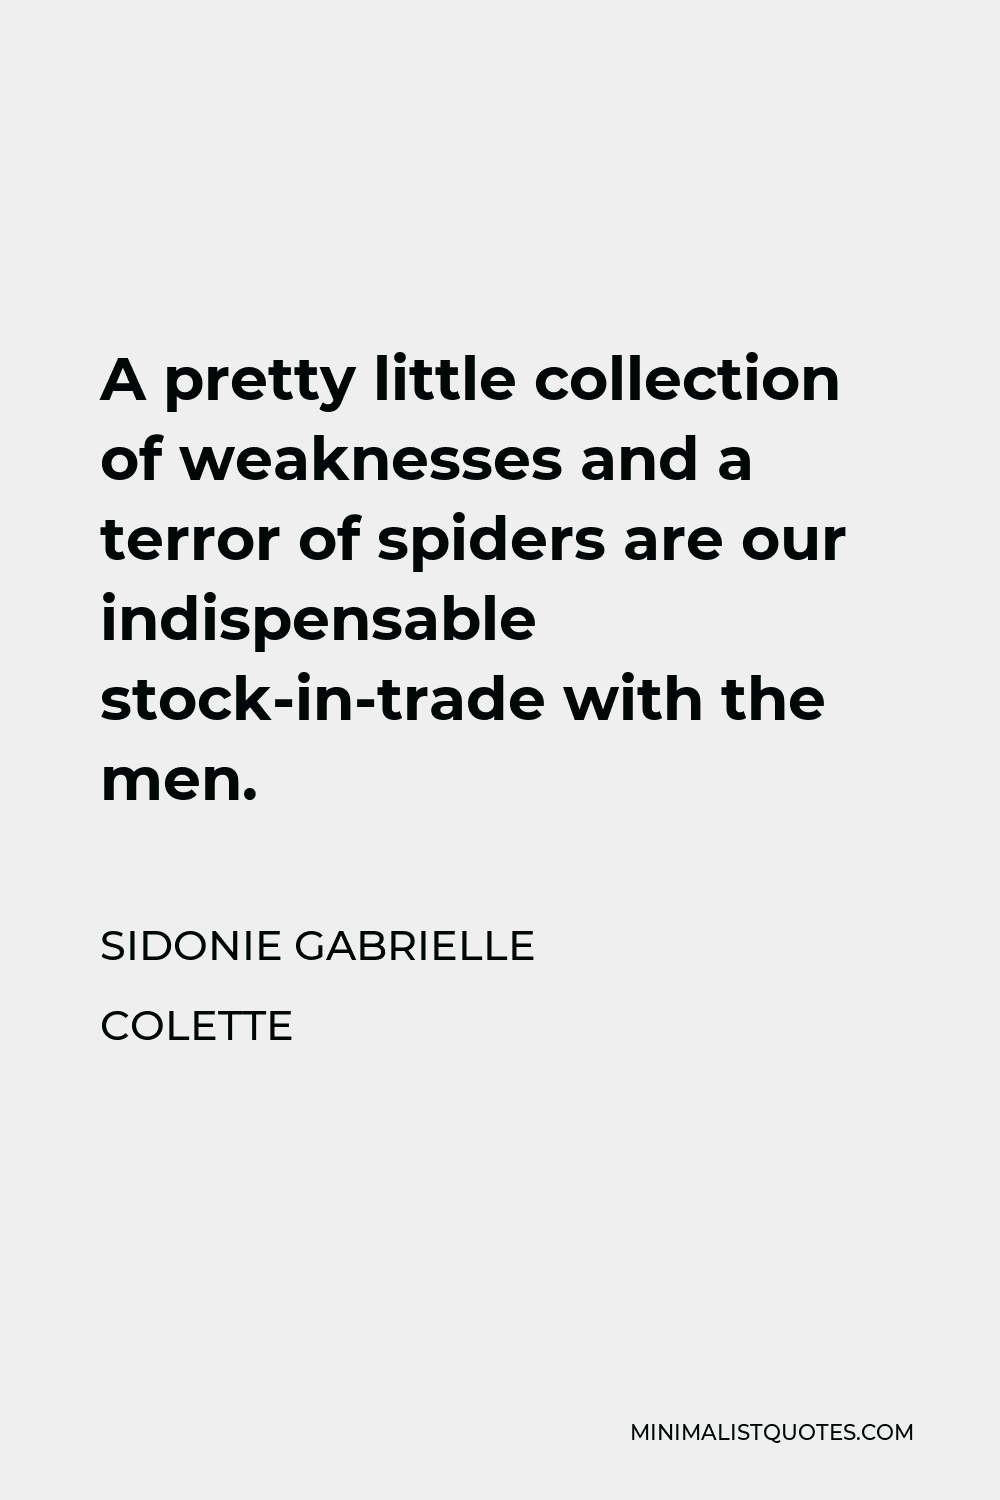 Sidonie Gabrielle Colette Quote - A pretty little collection of weaknesses and a terror of spiders are our indispensable stock-in-trade with the men.